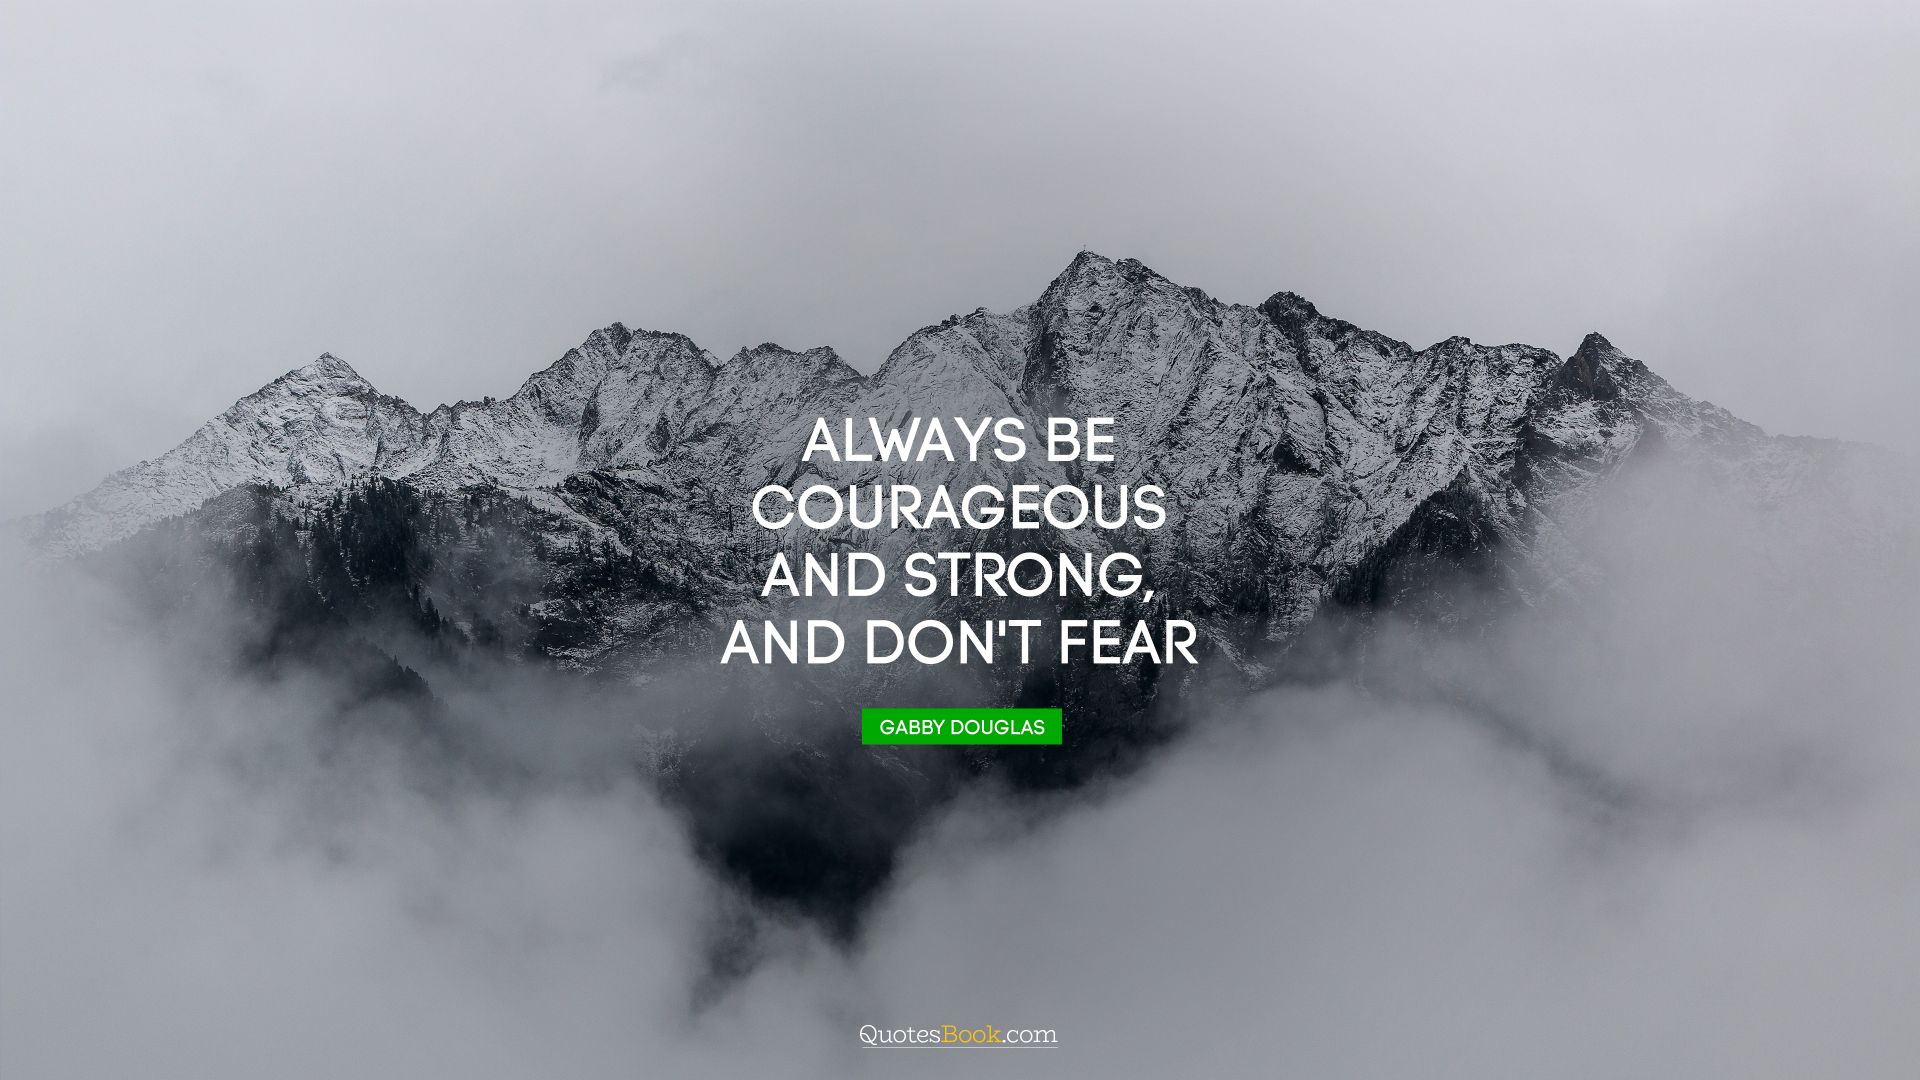 Always be courageous and strong, and don't fear. - Quote by Gabby Douglas